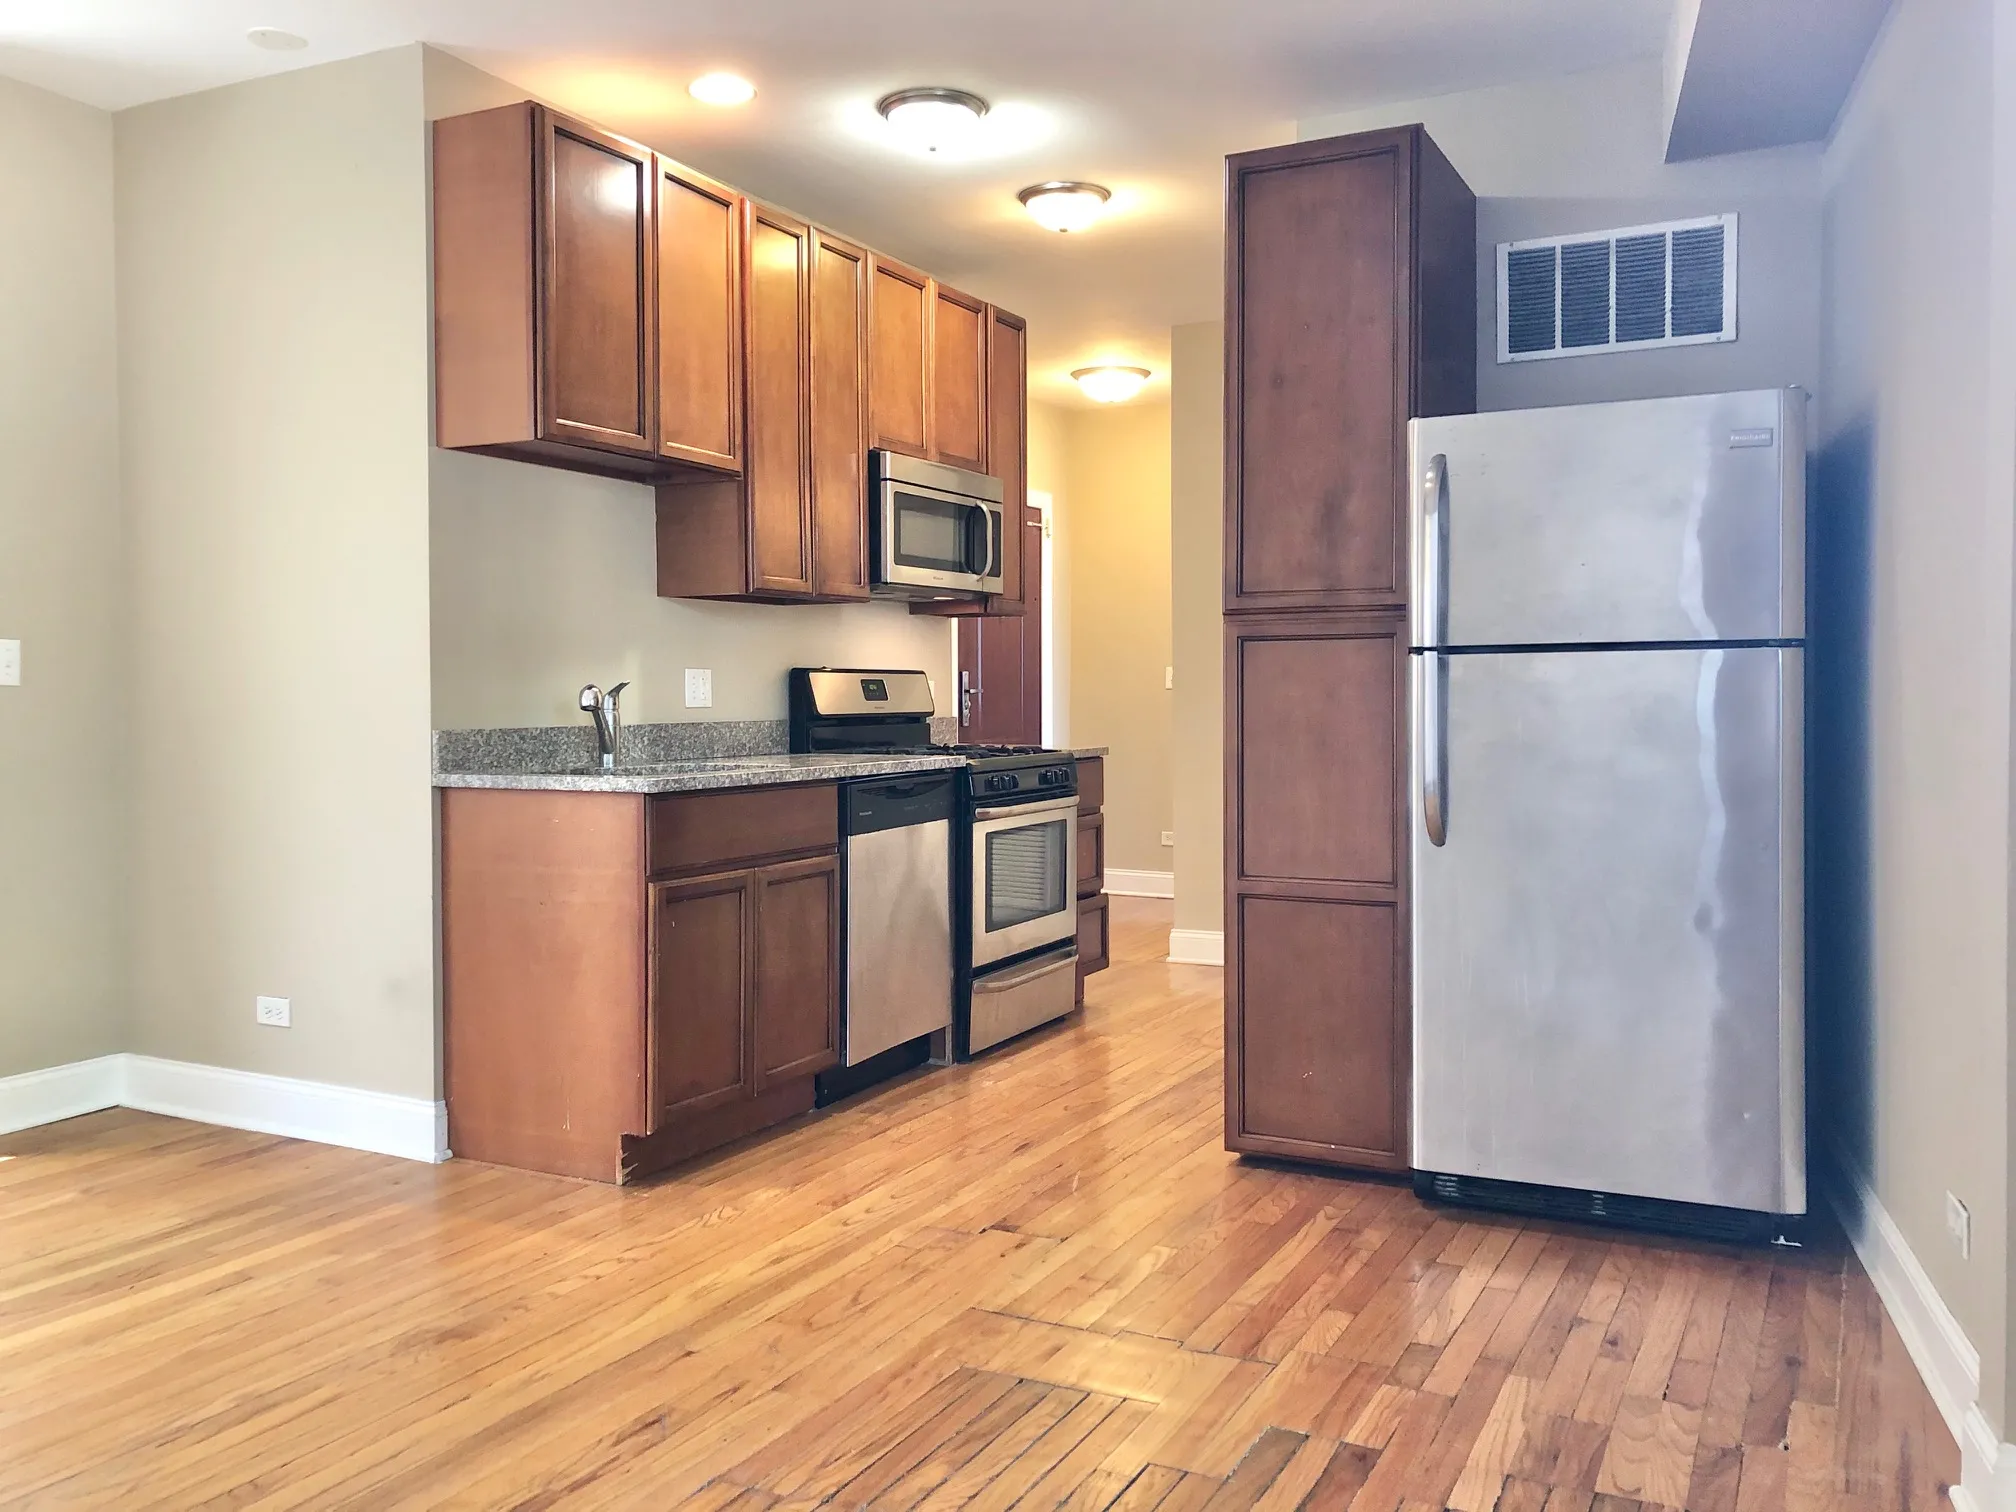 3731 N KIMBALL AVE 60618-unit#1N-Chicago-IL